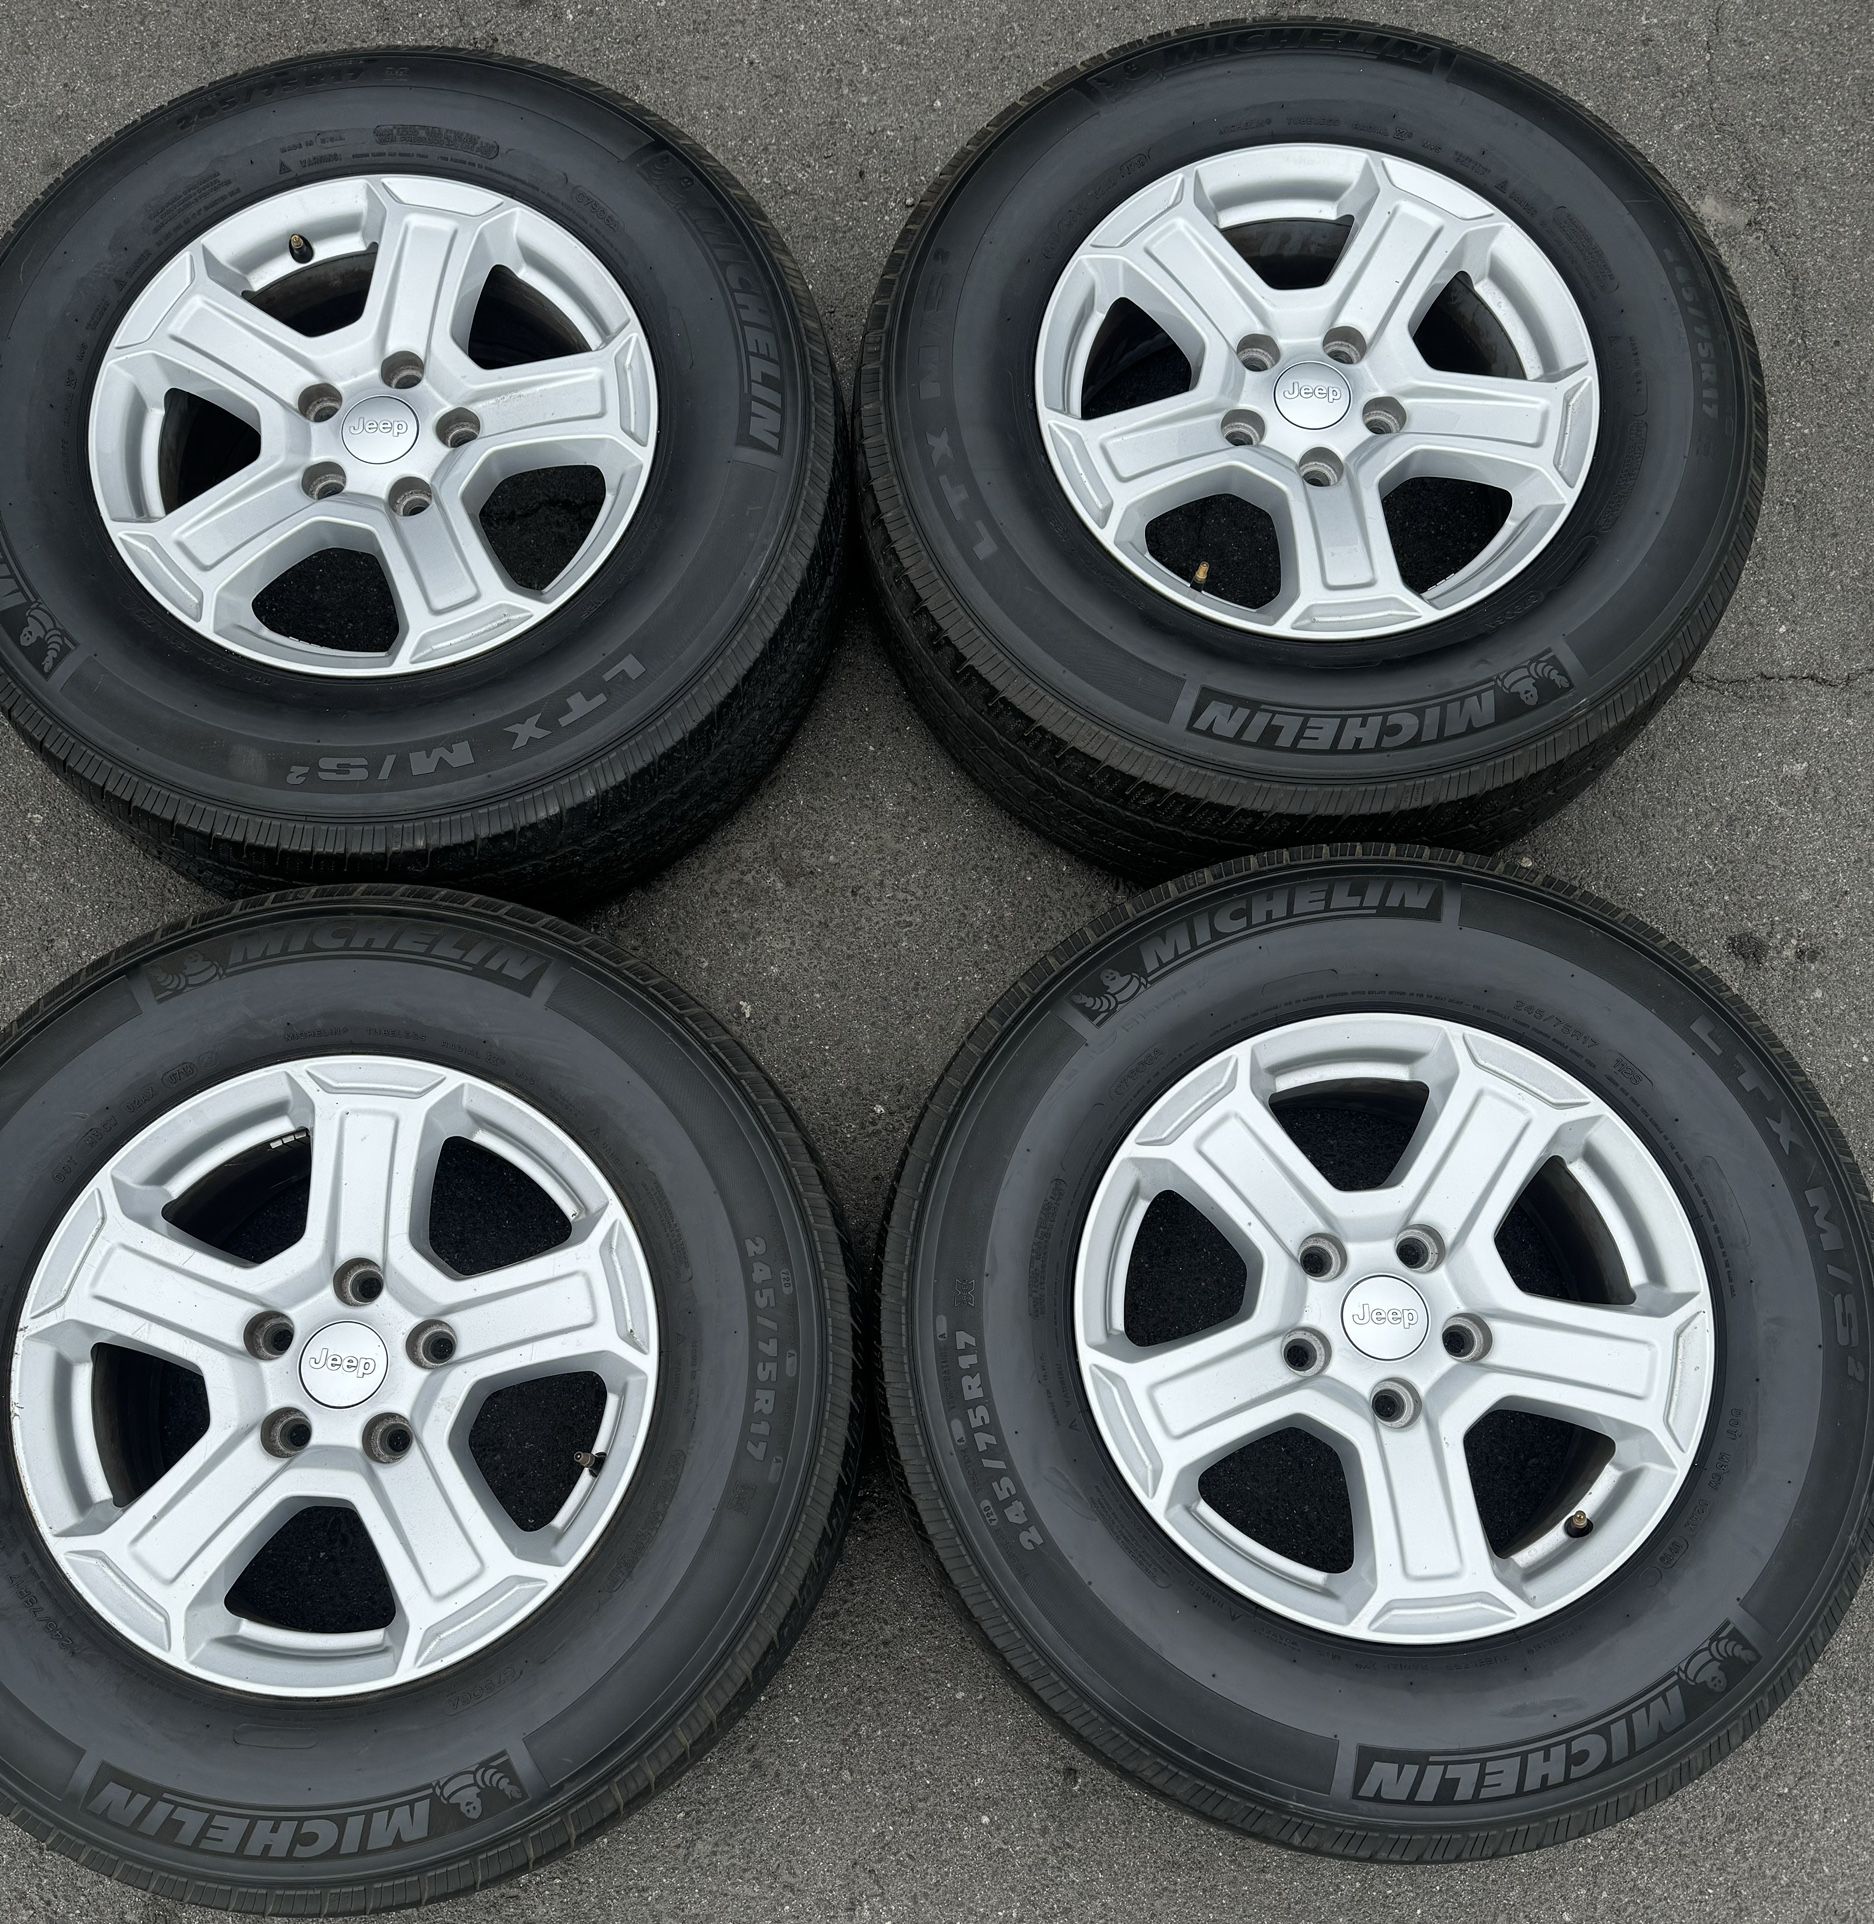 OEM JEEP Wheels And Michelin Tires 